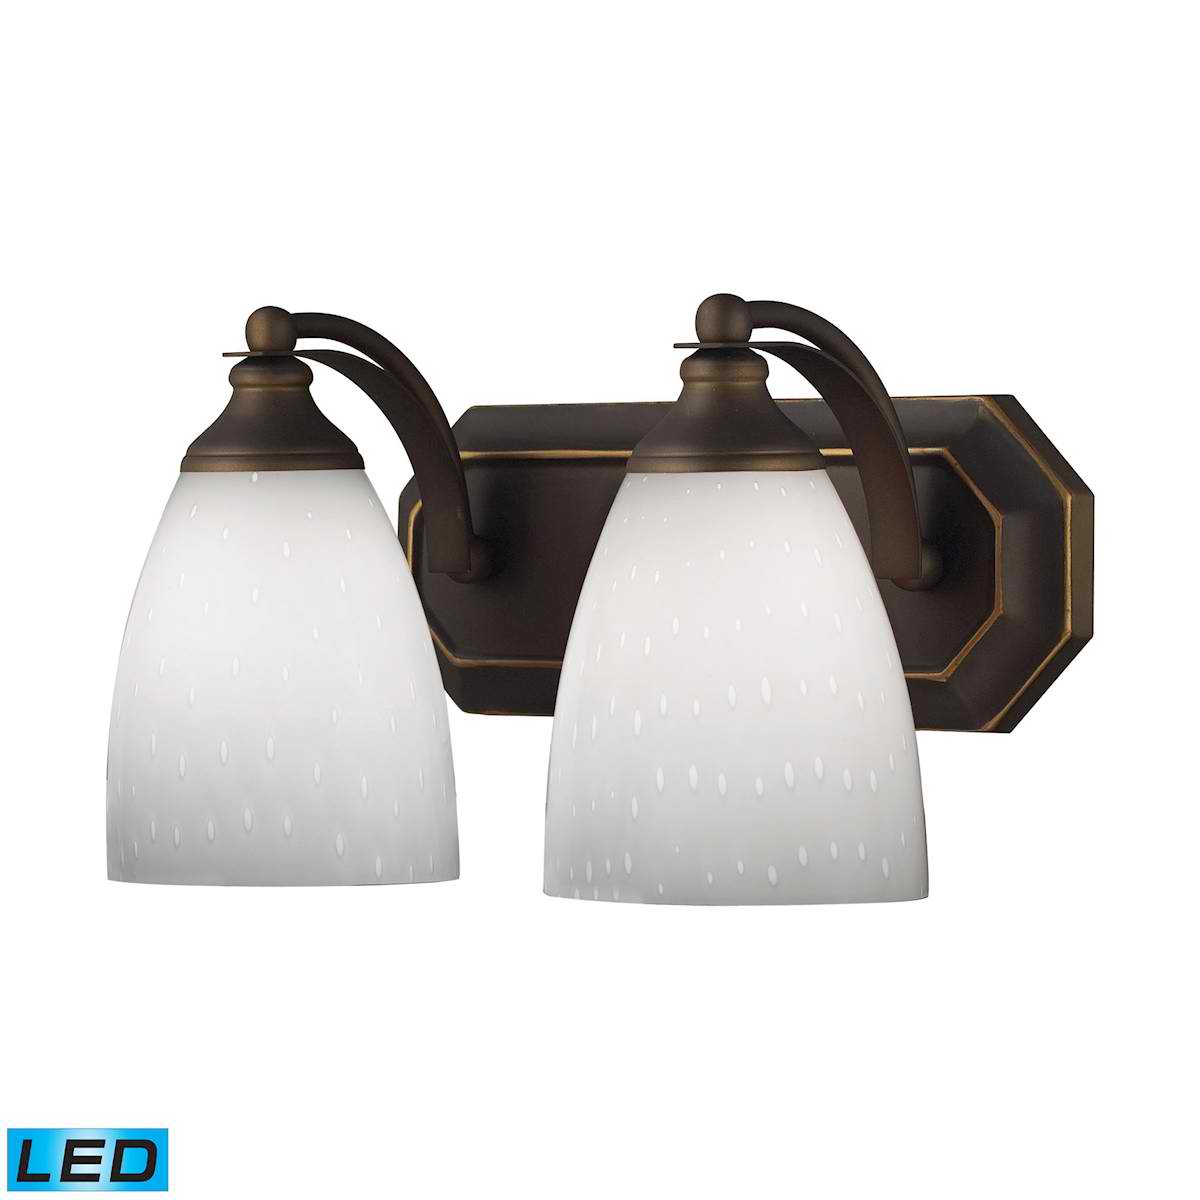 2 Light Vanity in Aged Bronze and Simply White Glass - LED, 800 Lumens (1600 Lumens Total) with Full Scale